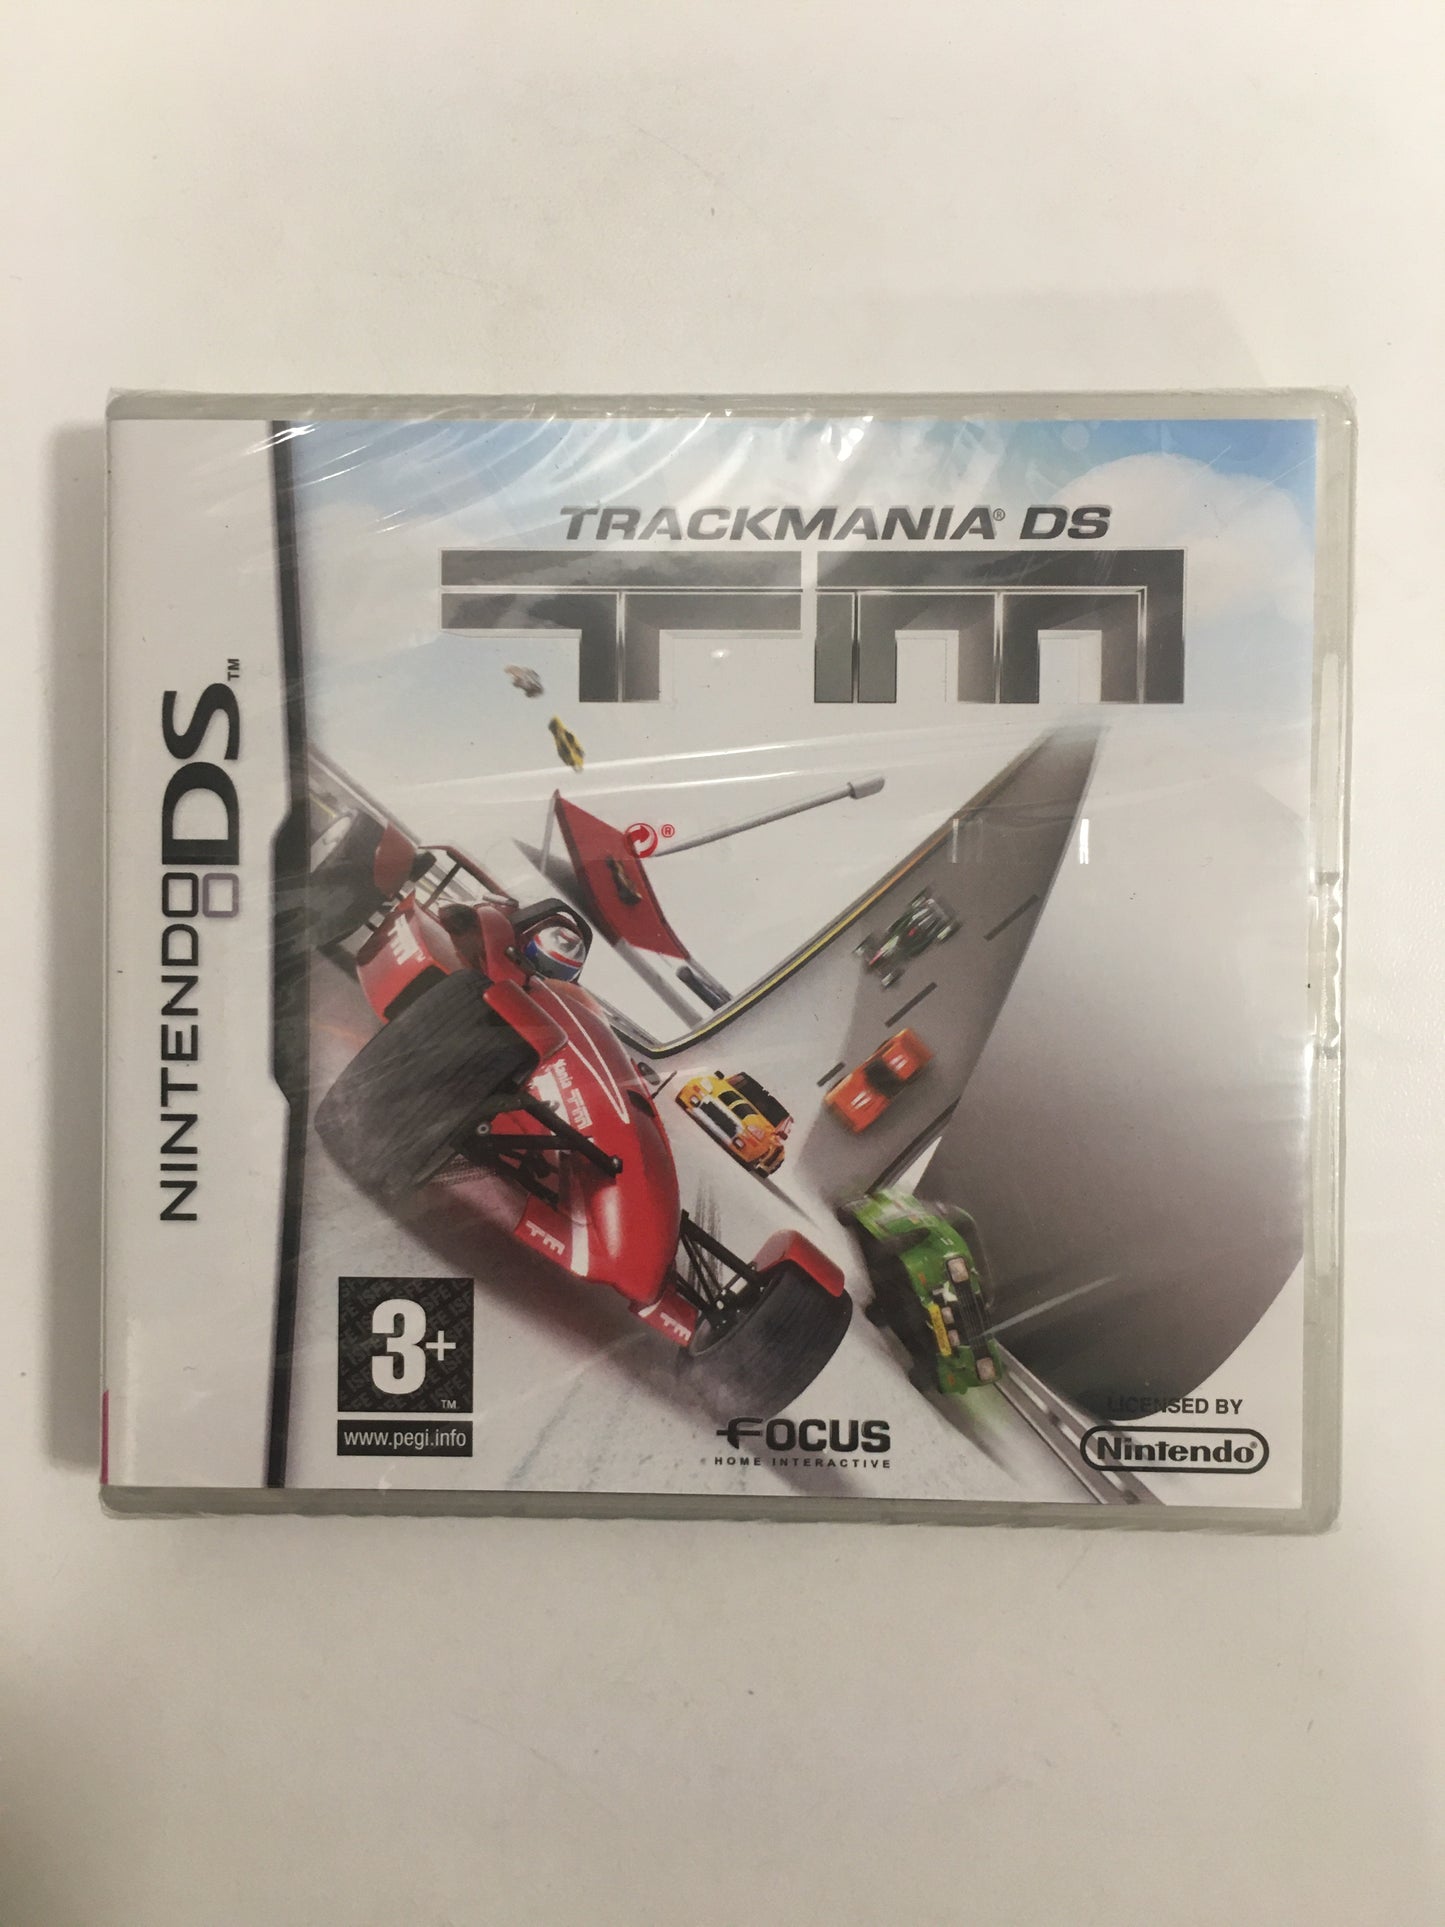 Trackmania Nintendo ds neuf sous blister